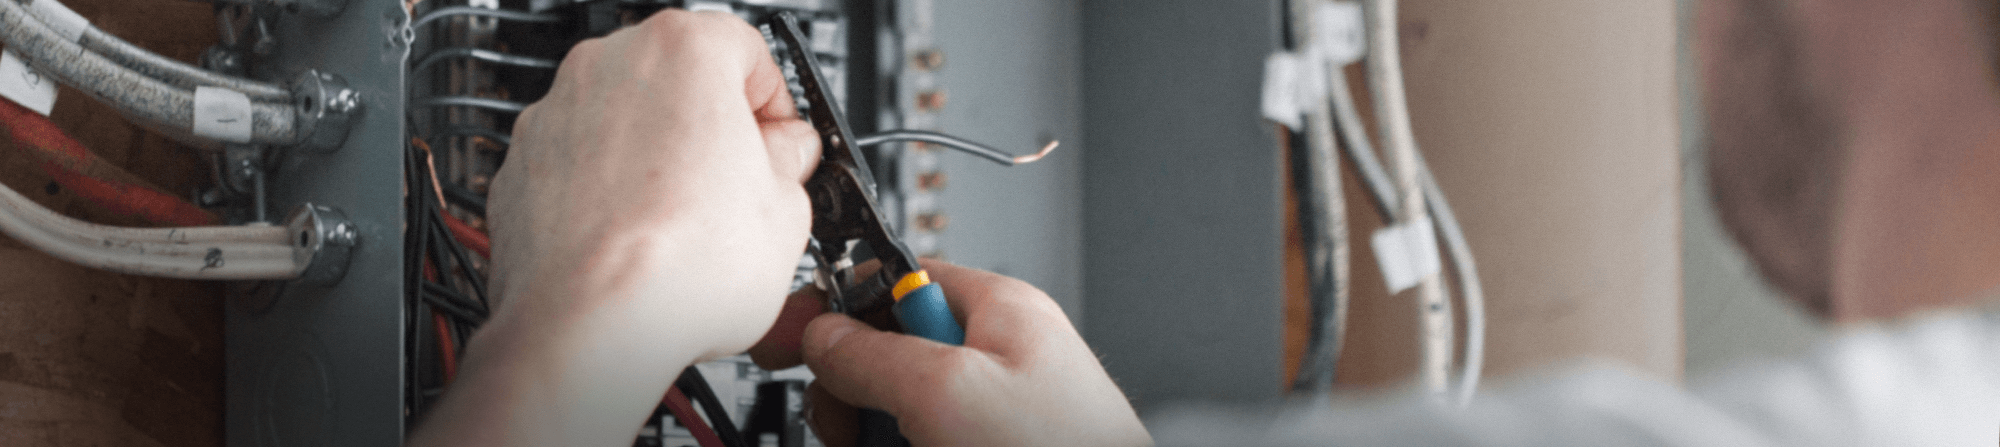 Electrical panel repair & replacement Wisconsin